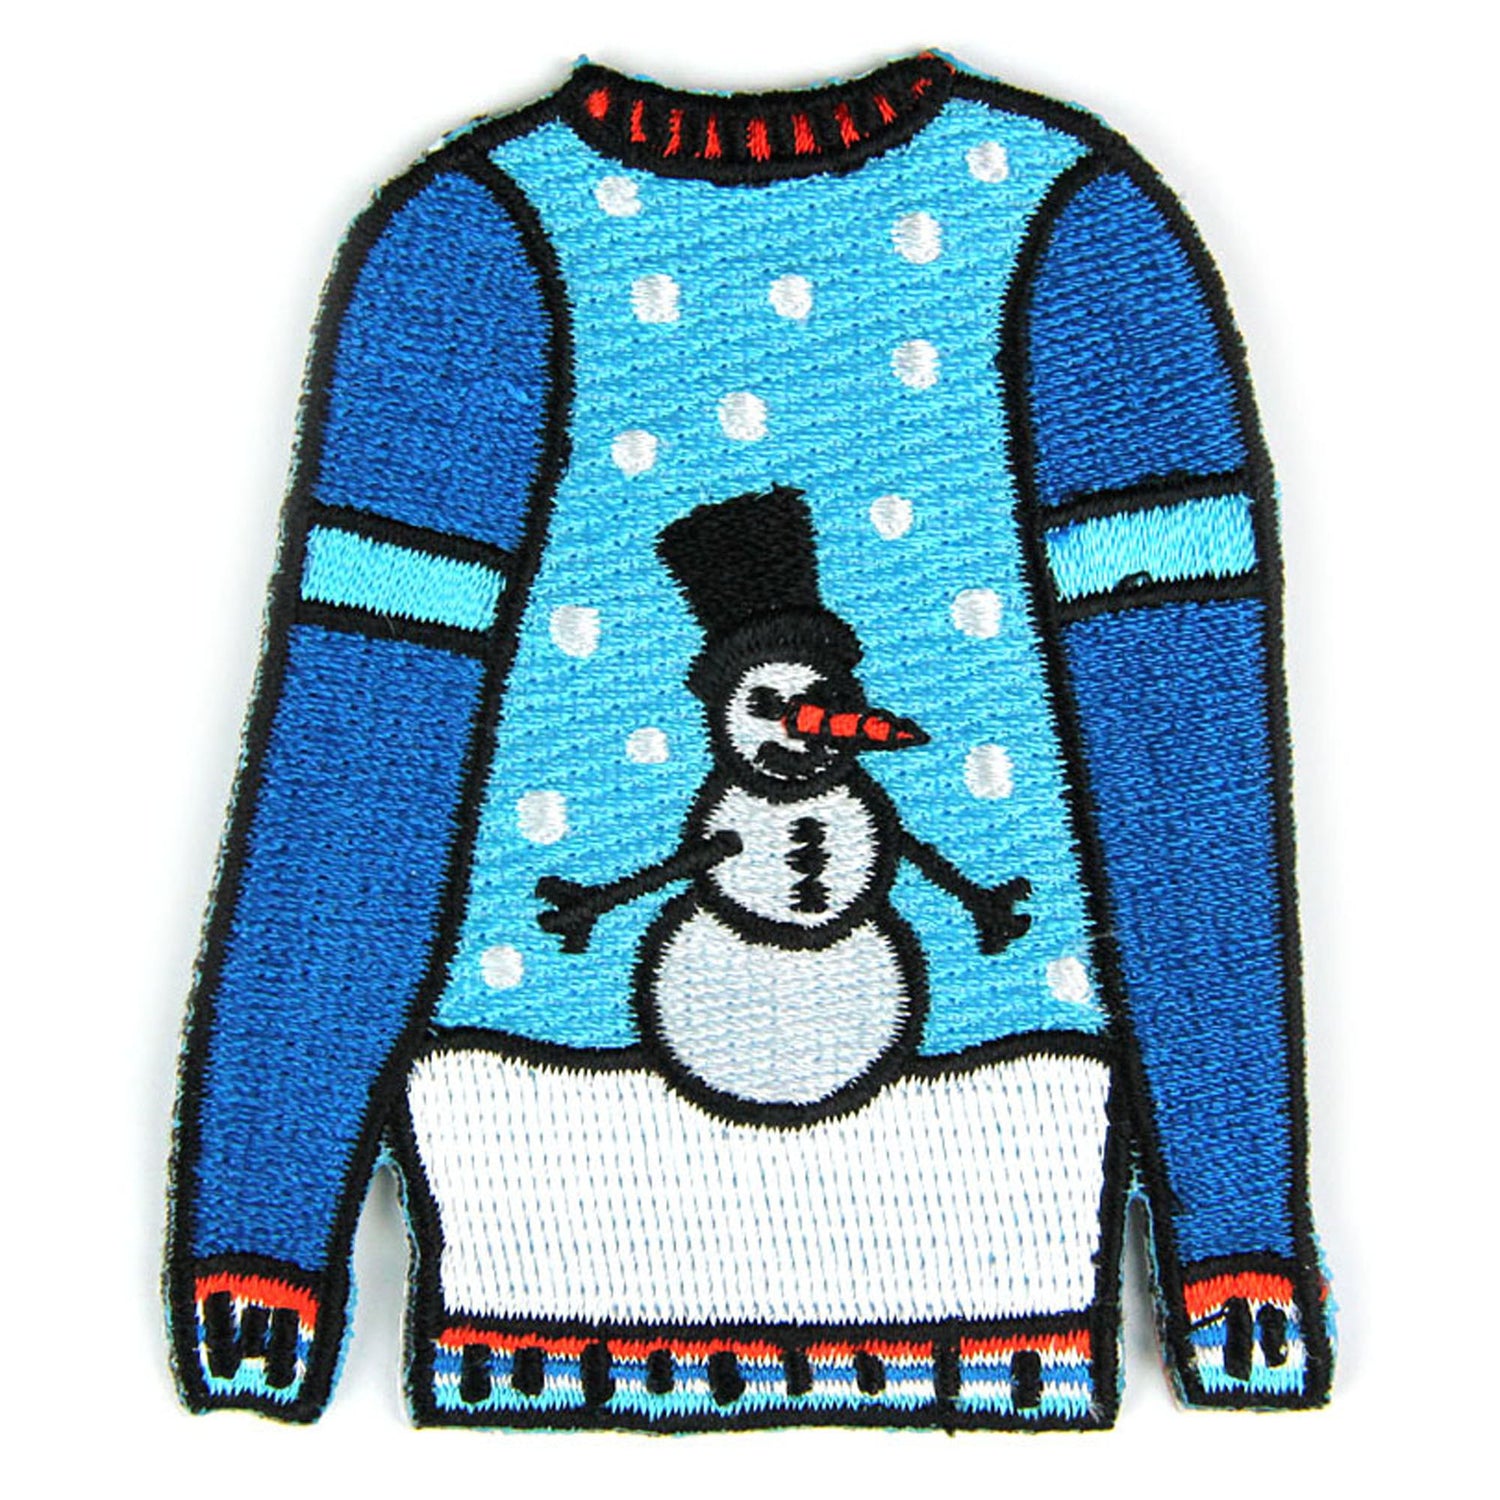 Winter Sweater Patch